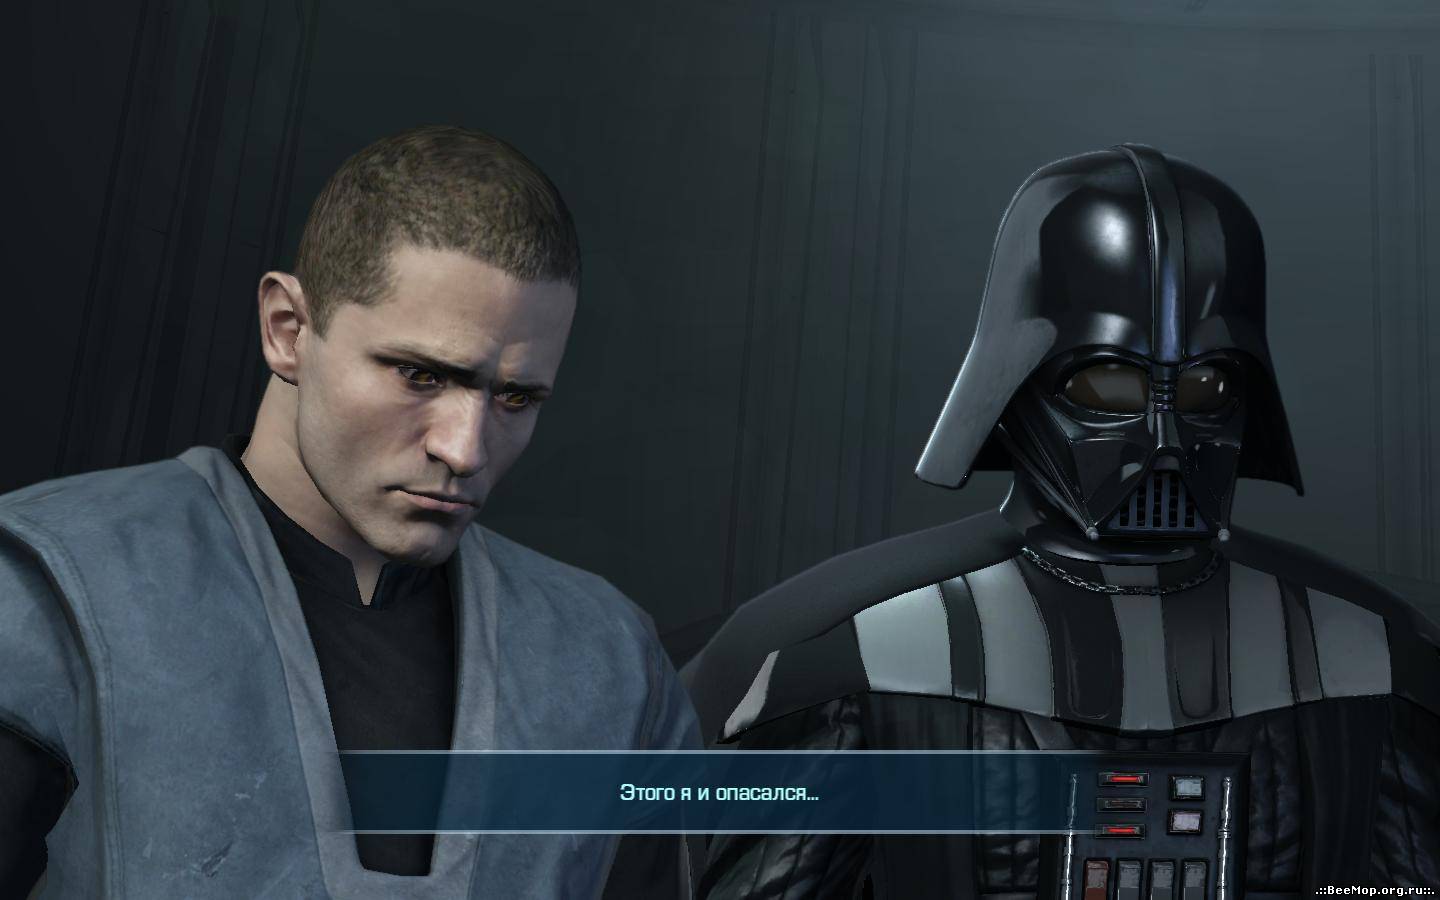 Игра star wars the force unleashed. Стар ВАРС the Force unleashed 2. Стар ВАРС the Force unleashed 1. Star Wars the Force unleashed 1. Star Wars: the Force unleashed 1/2.